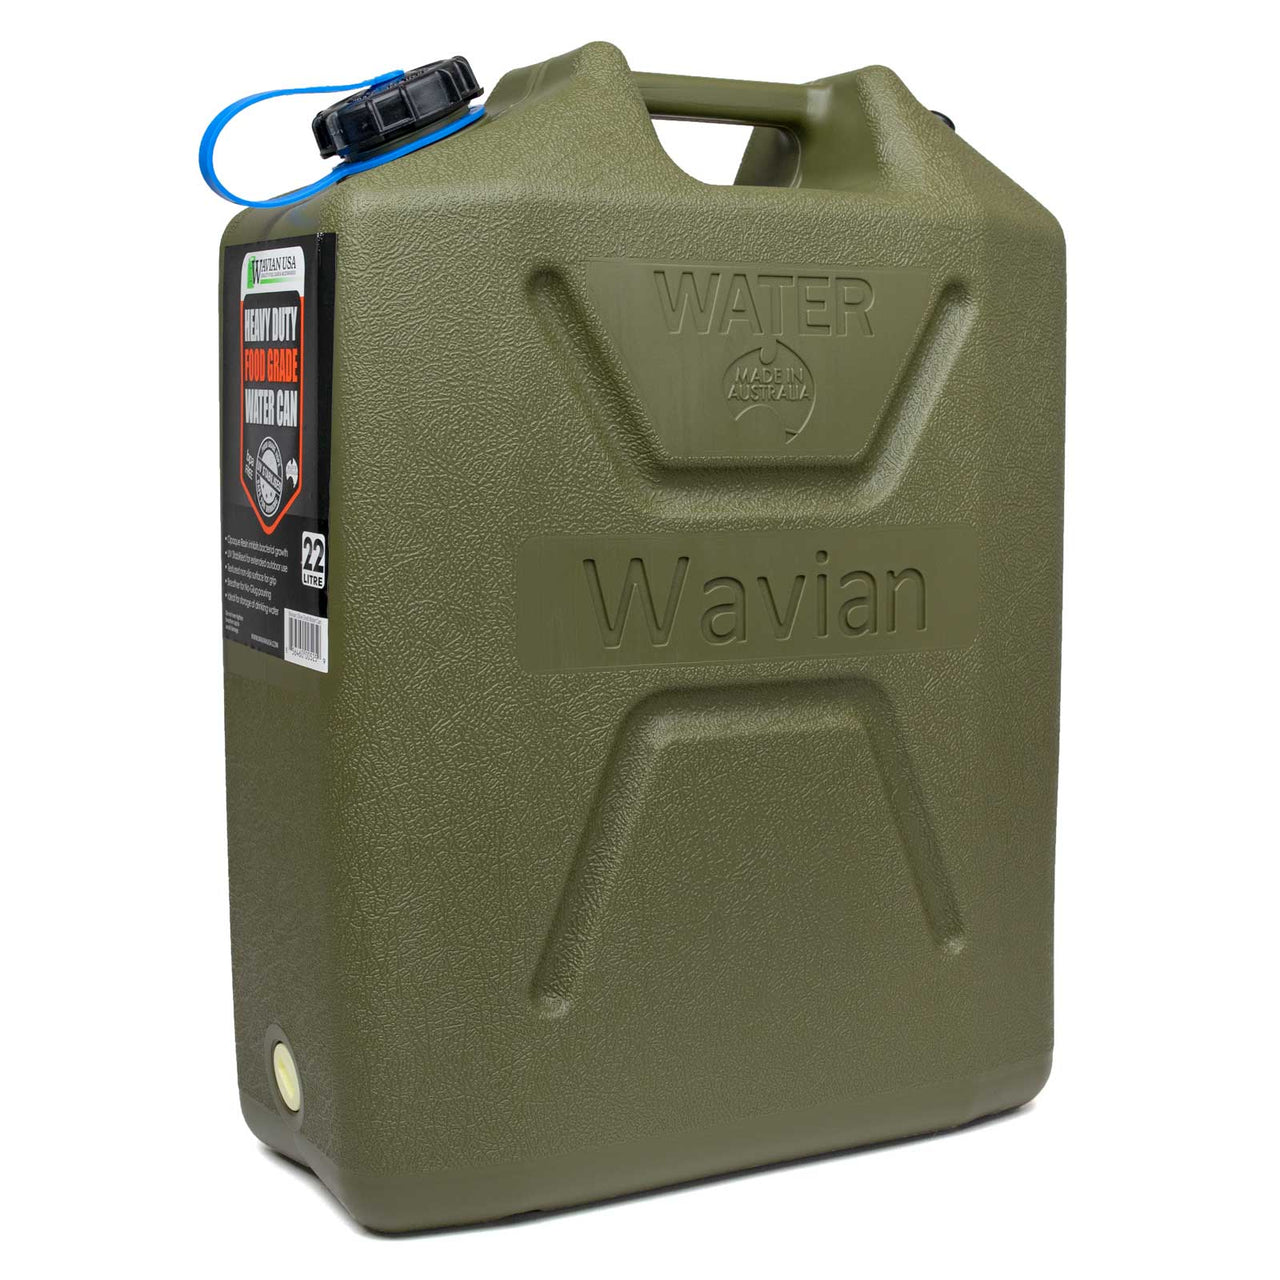 Wavian 5 Gallon Water Can, BPA Free, Food-Grade, UV Stabilized for Extended Outdoor Use